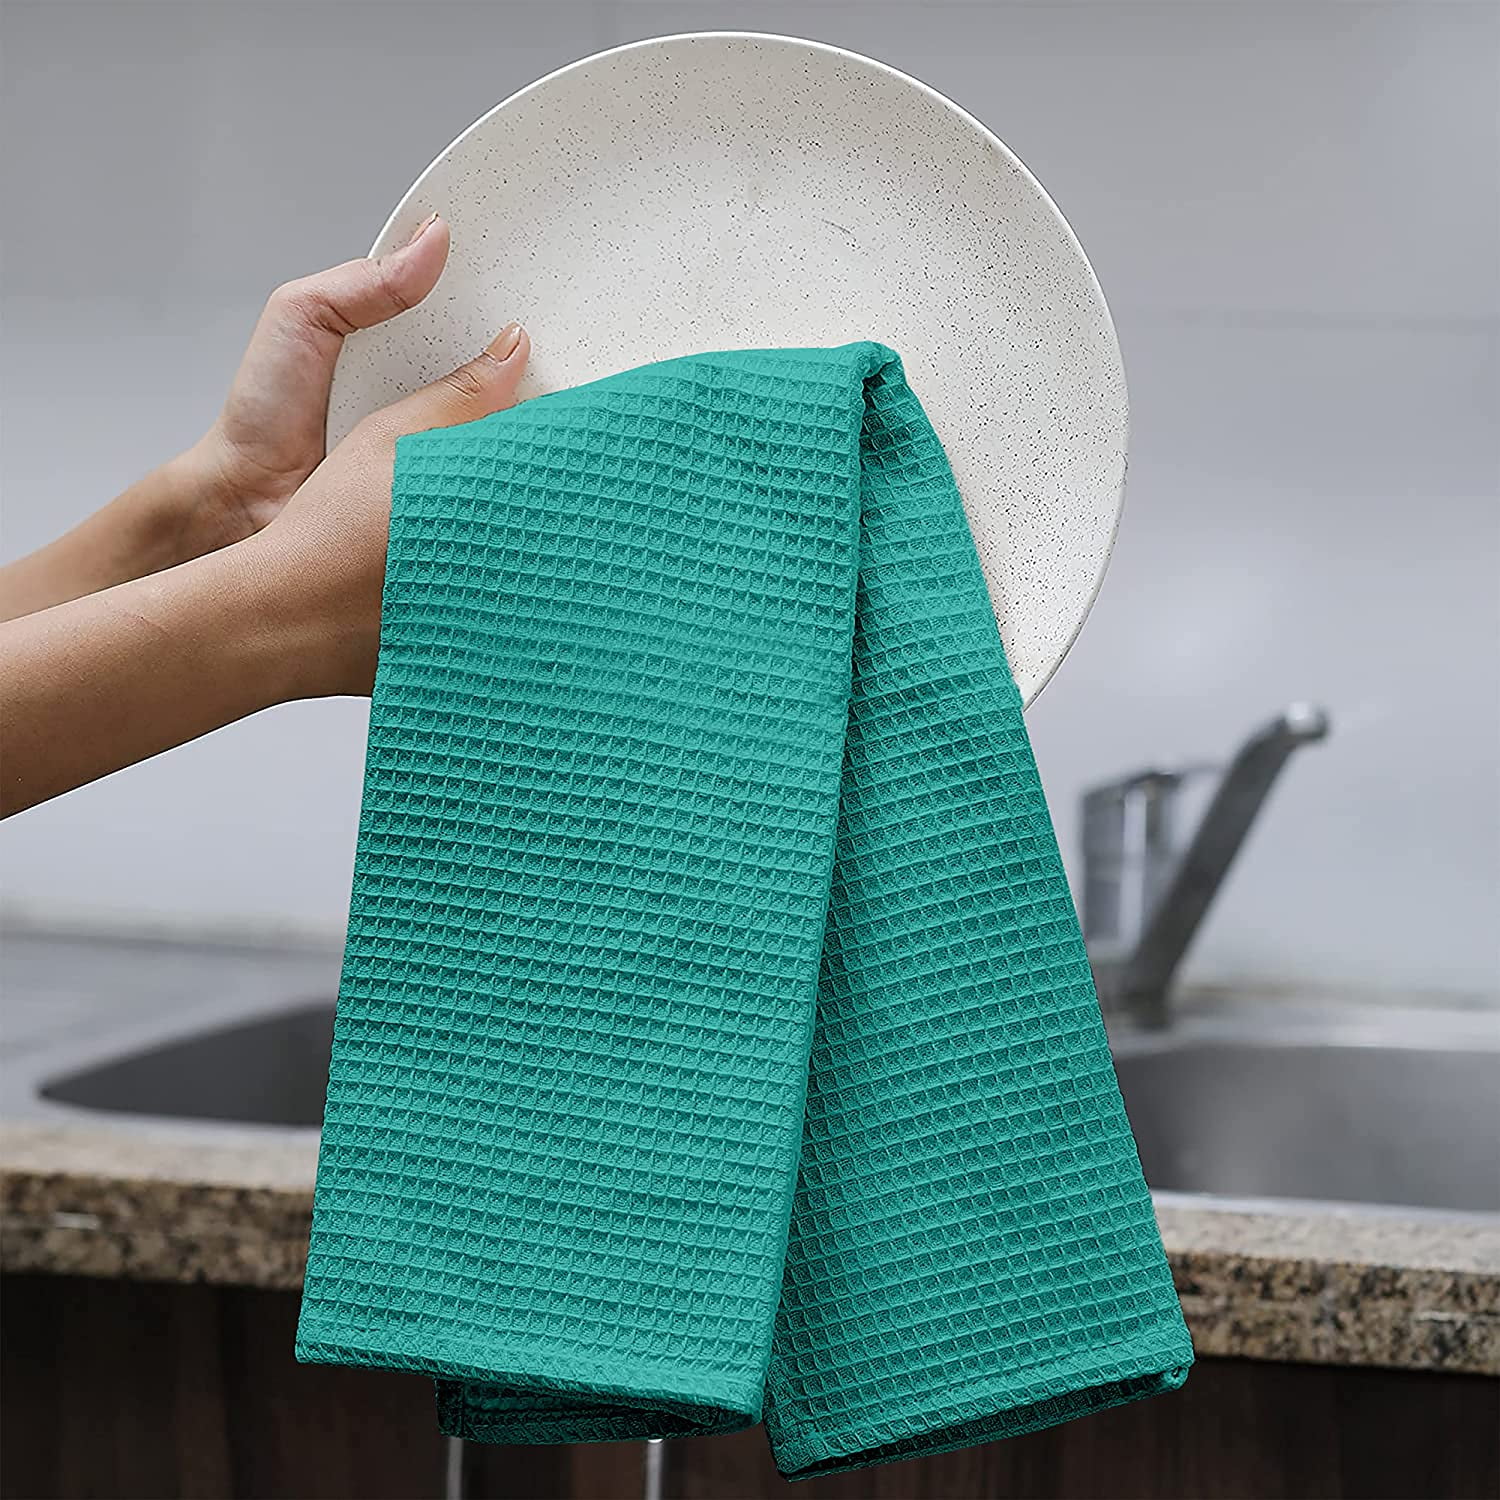 Ruvanti 12 Pcs 100% Cotton 15x25 Kitchen Towels, Dish Towel for Kitchen,  Soft, Washable Dish Cloths, Super Absorbent Terry Tea Towels Linen Dishcloth  for Quick Drying, Cleaning, Dish Rags, Teal-White 